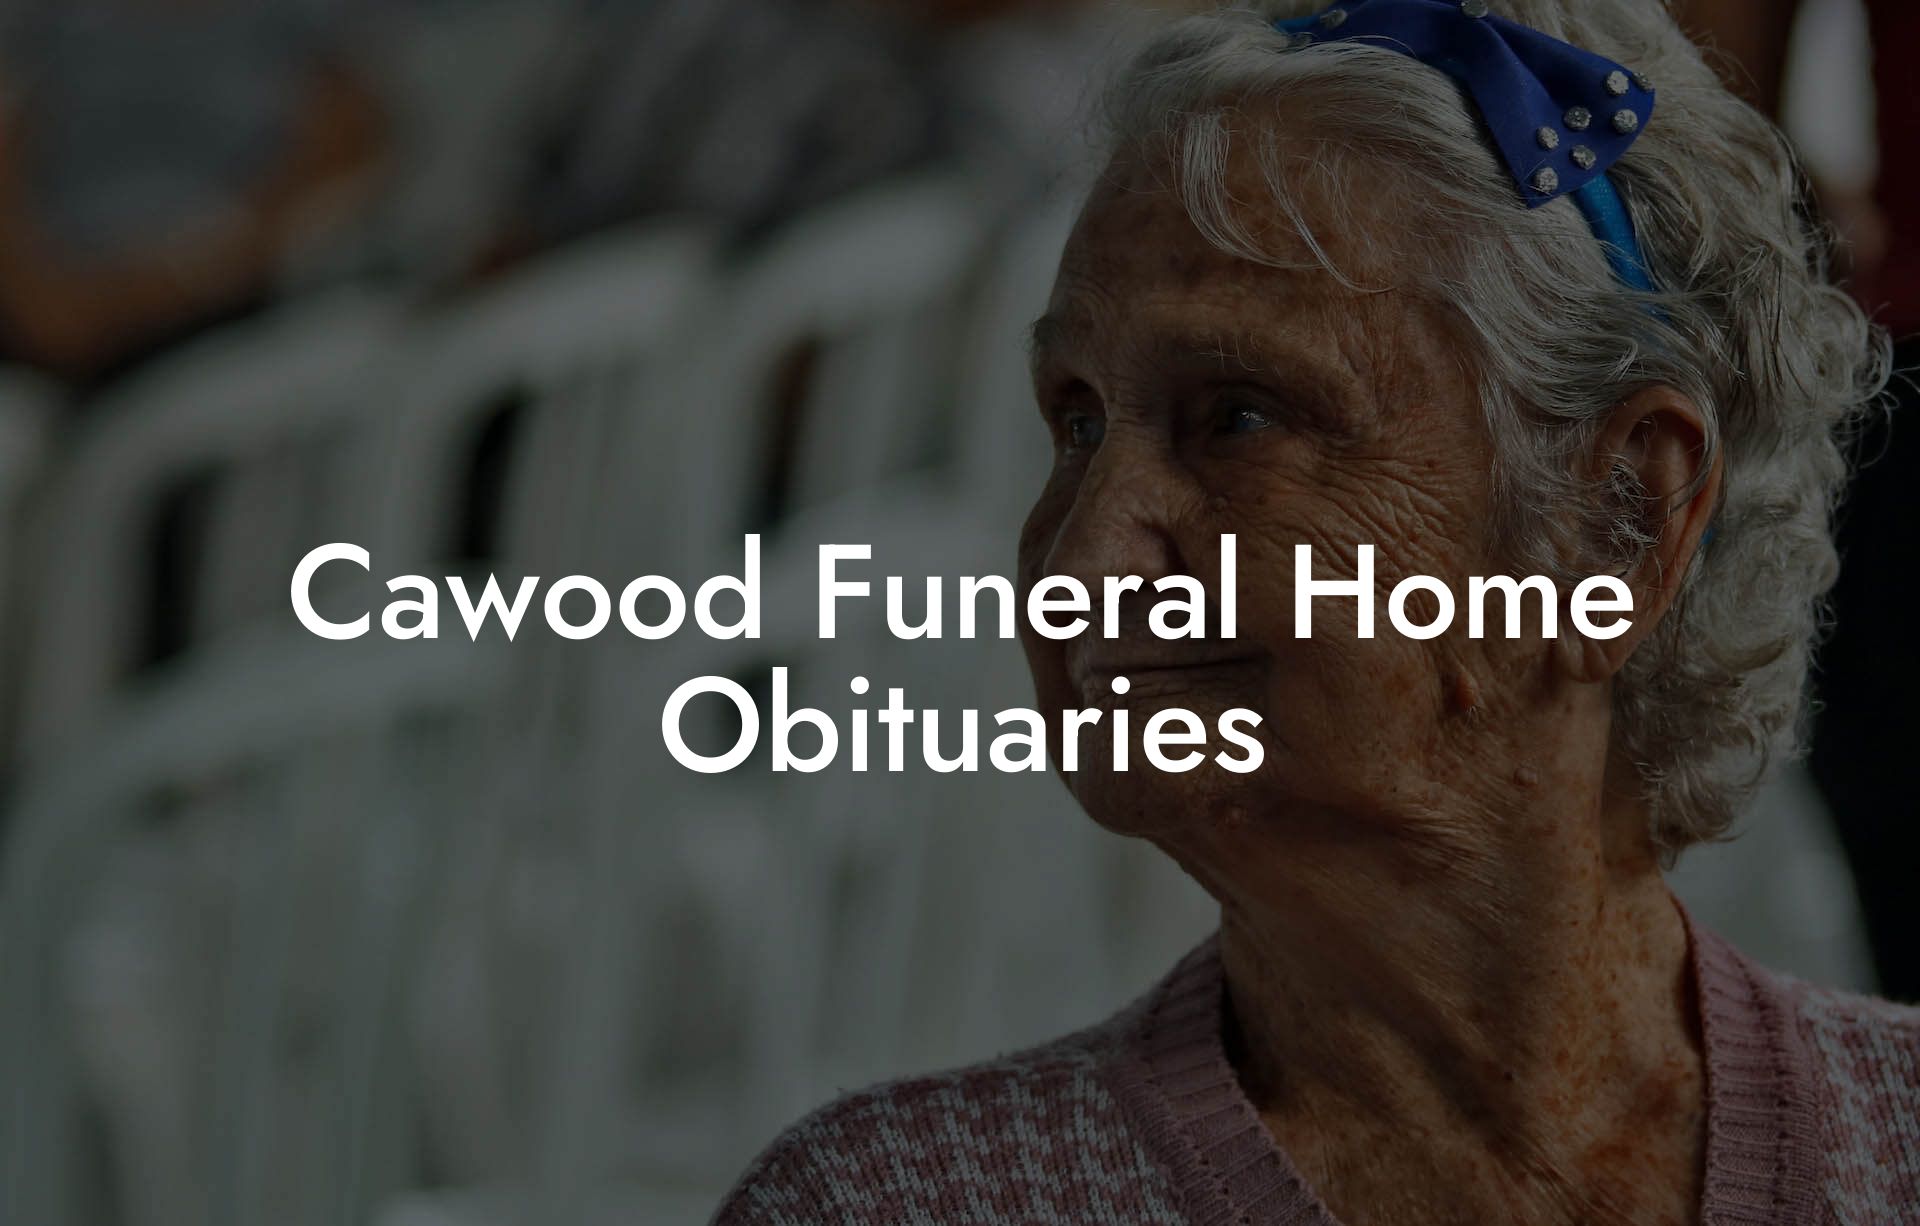 Cawood Funeral Home Obituaries